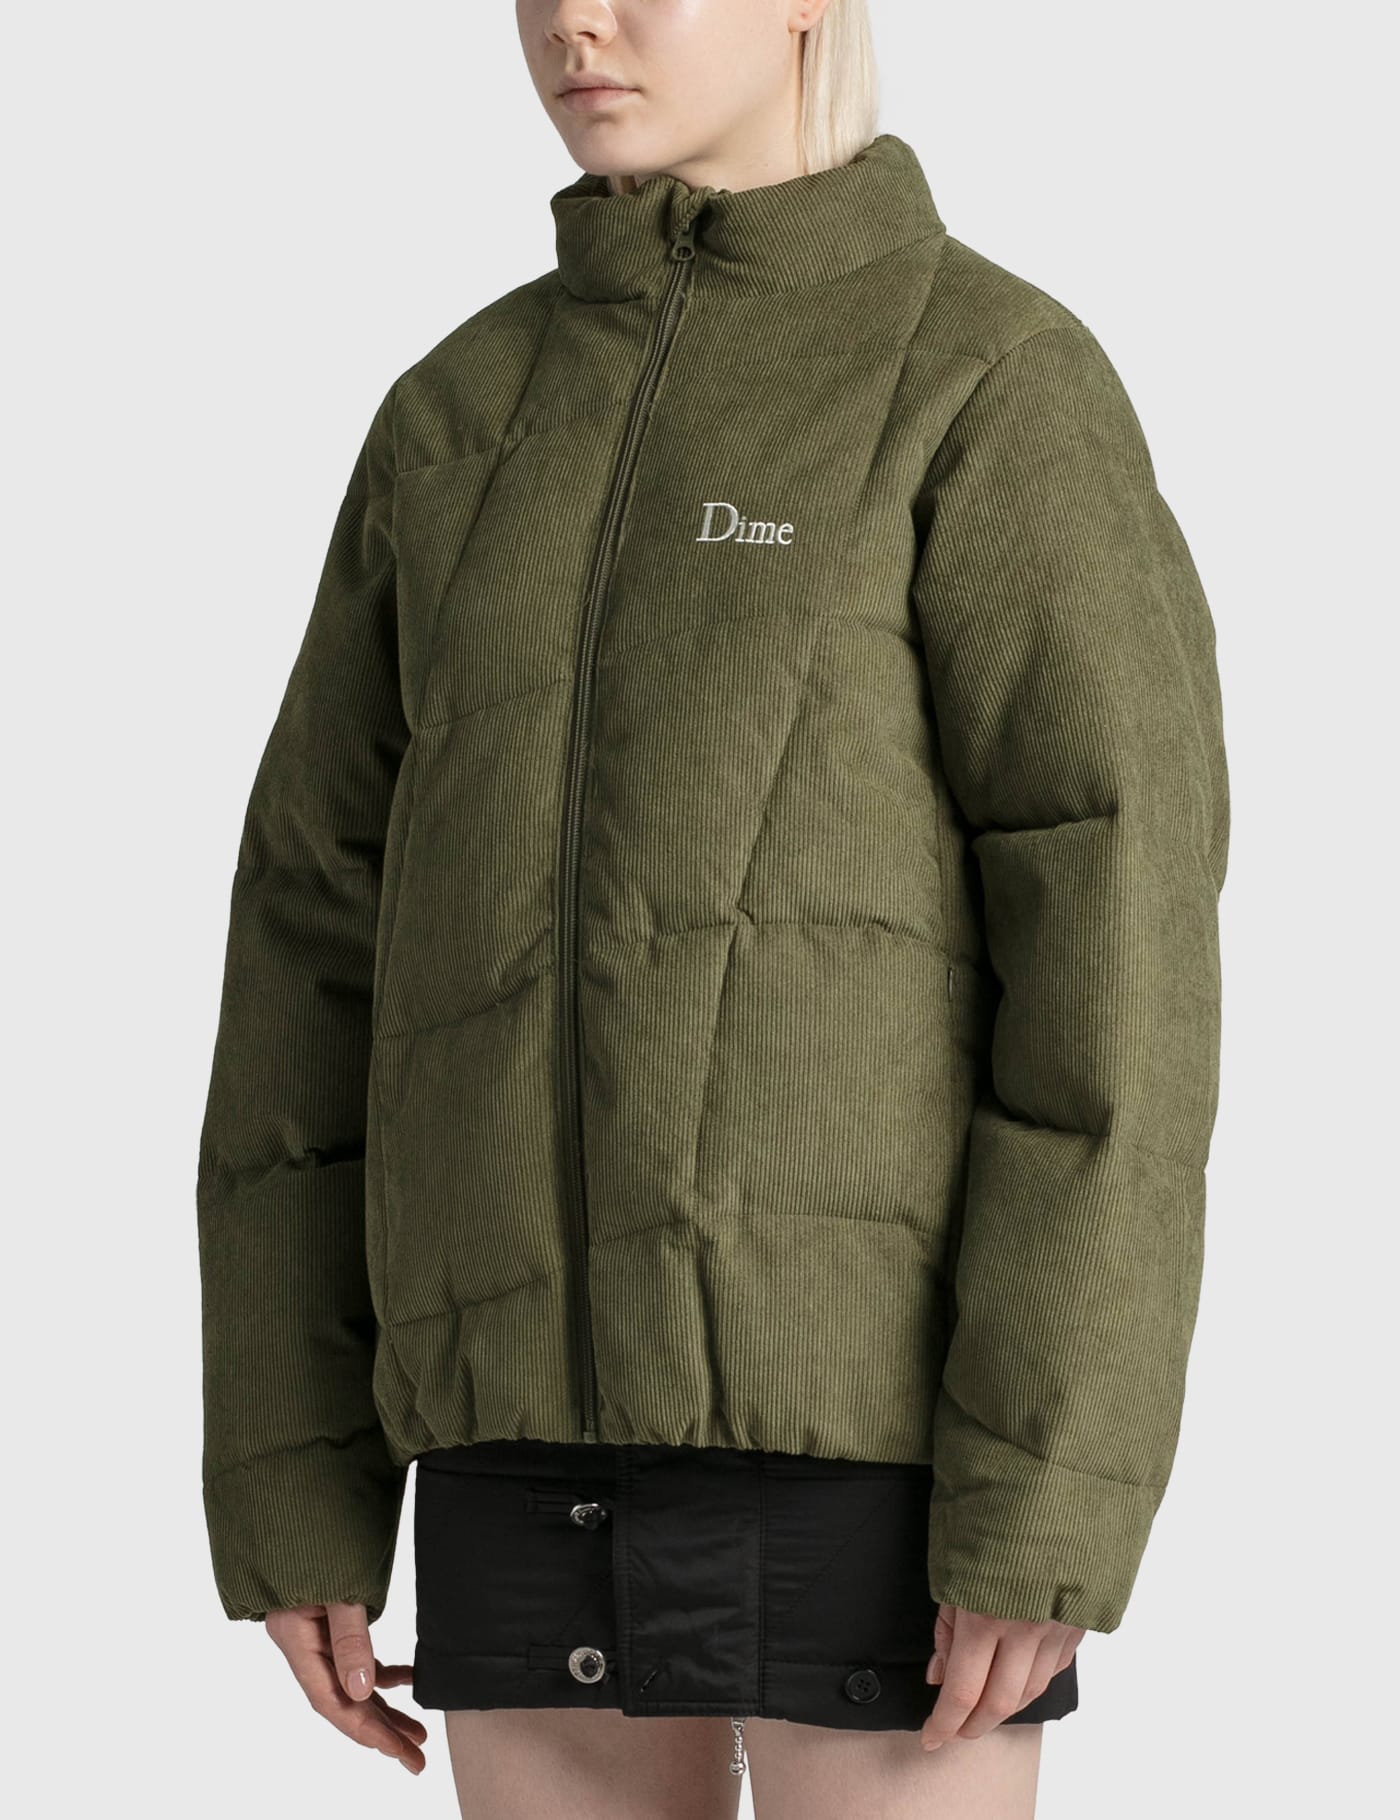 Dime - Corduroy Wave Puffer Jacket | HBX - Globally Curated 